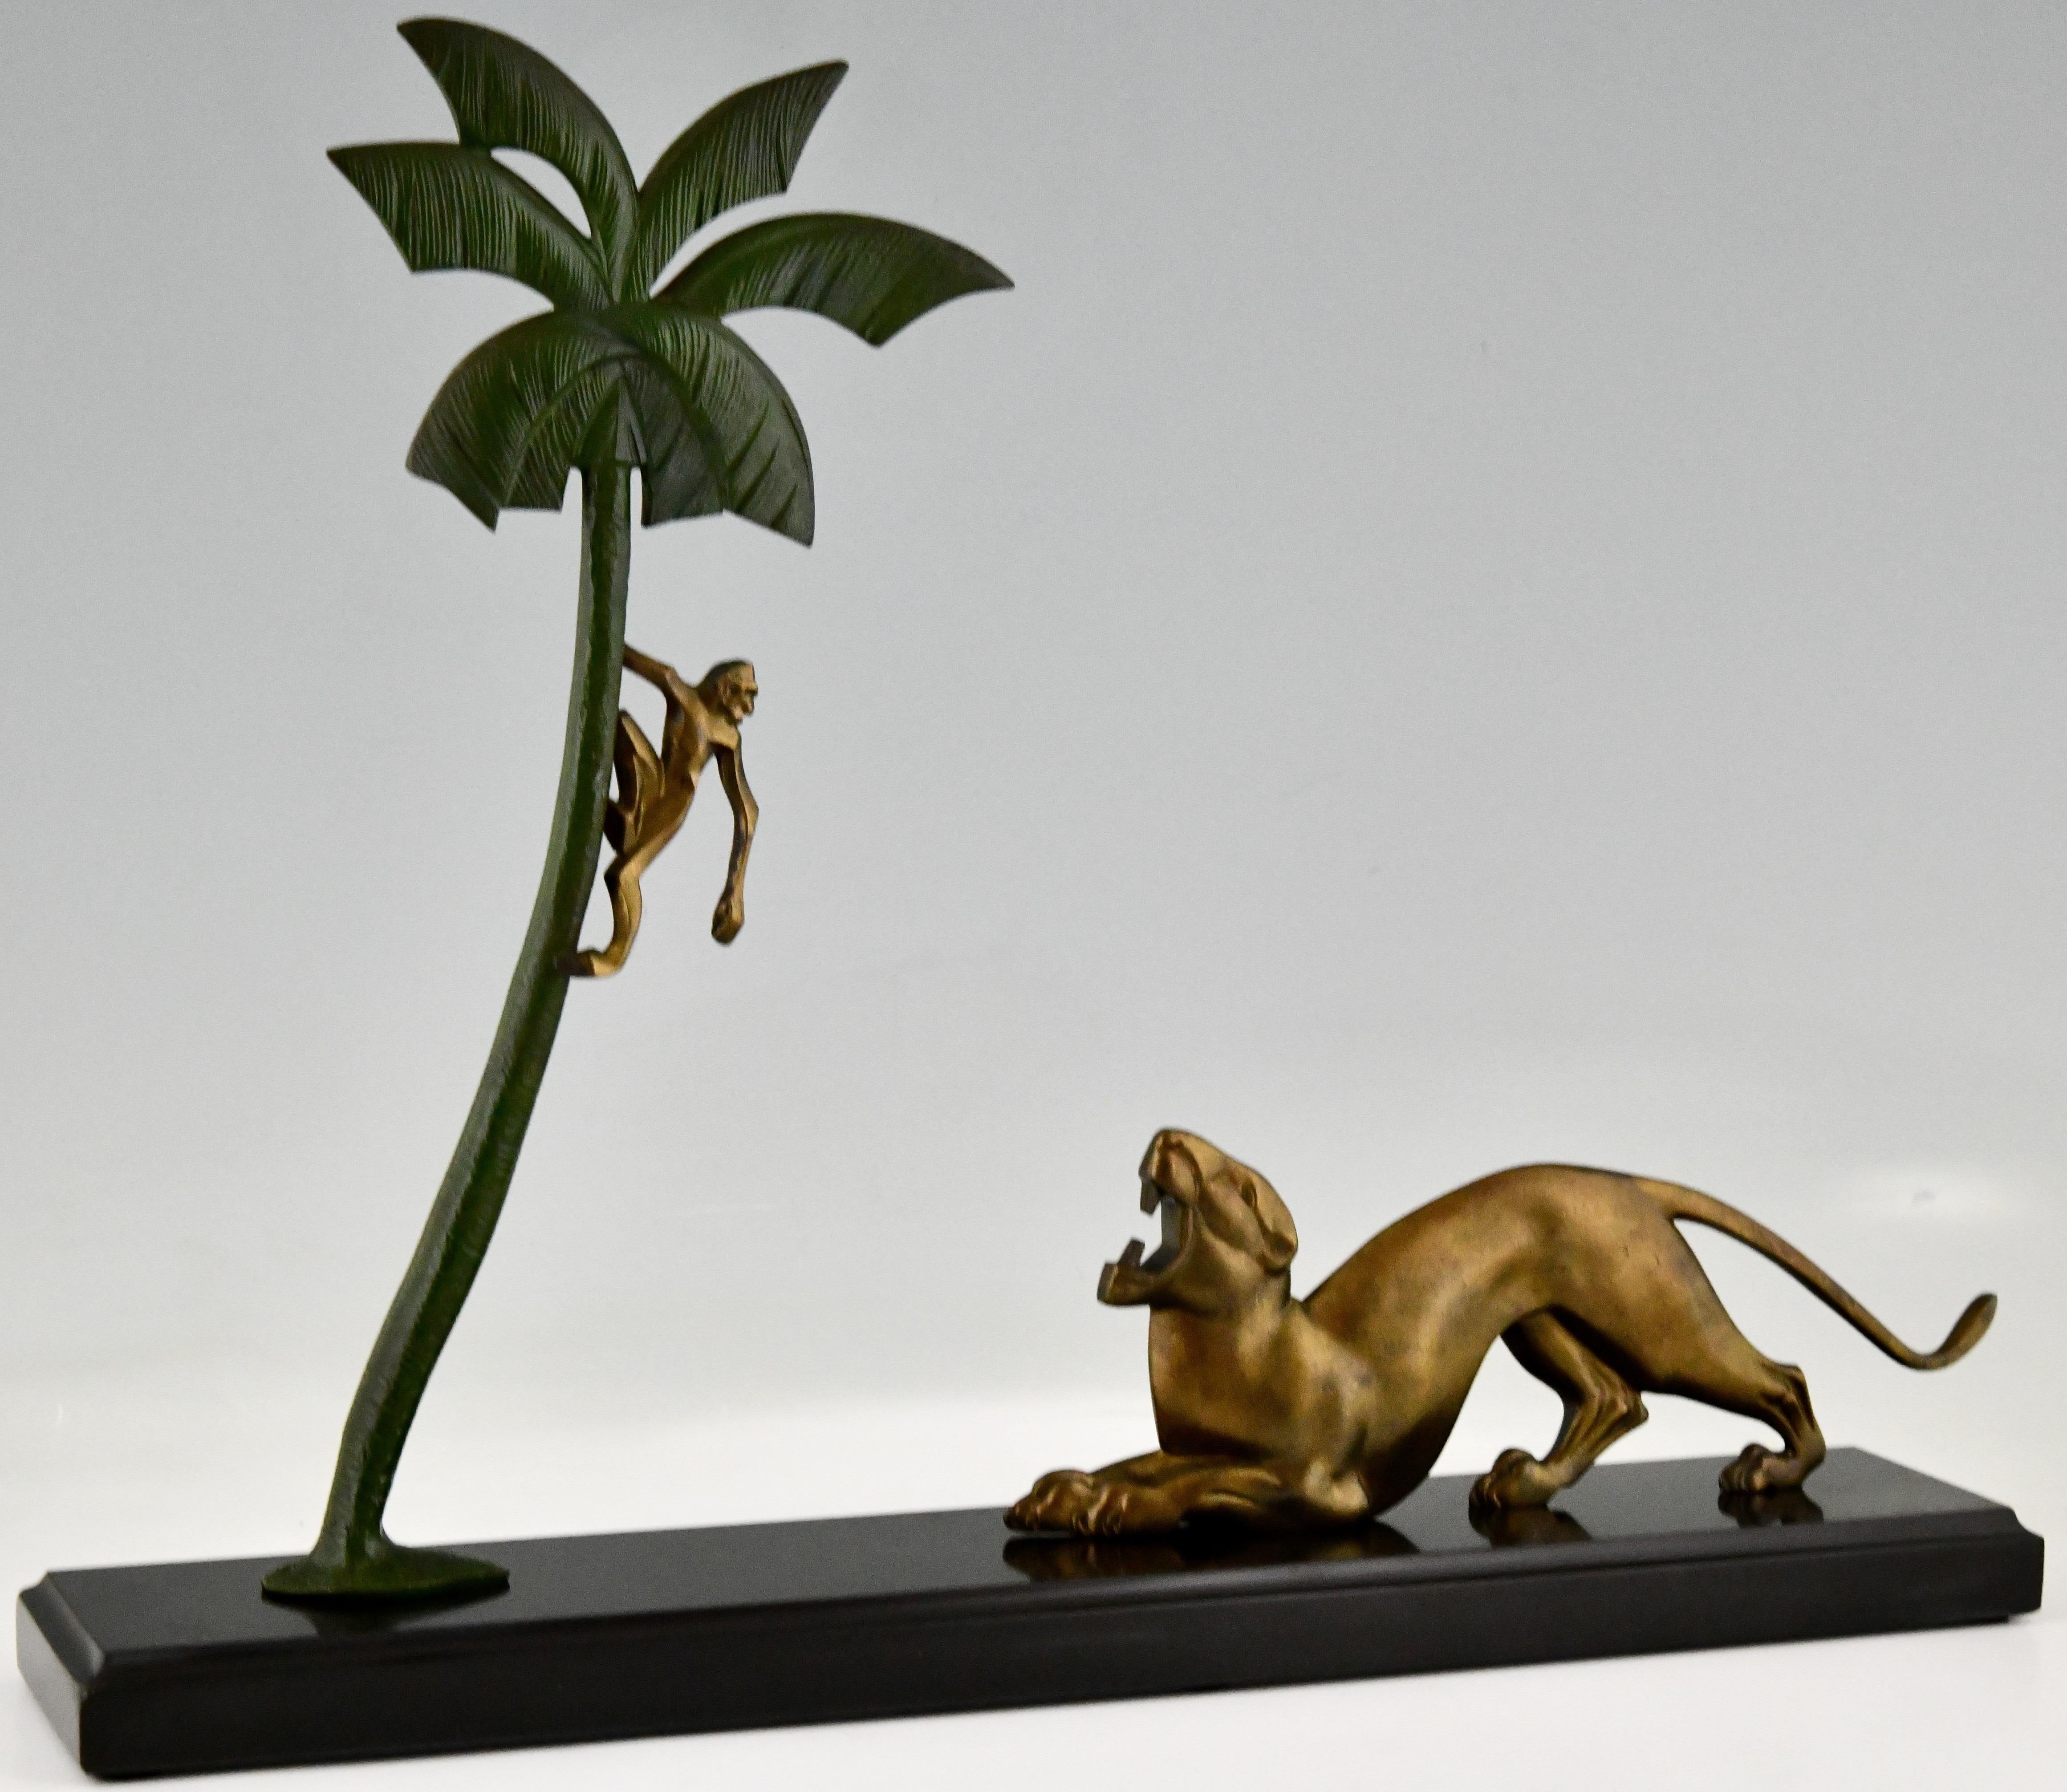 Art Deco bronze sculpture panther and monkey in palmtree by P. Berjean. Patinated bronze on a Belgian Black marble base. France 1930.

This sculpture is illustrated in: Statuettes of the Art Deco period, Alberto Shayo.